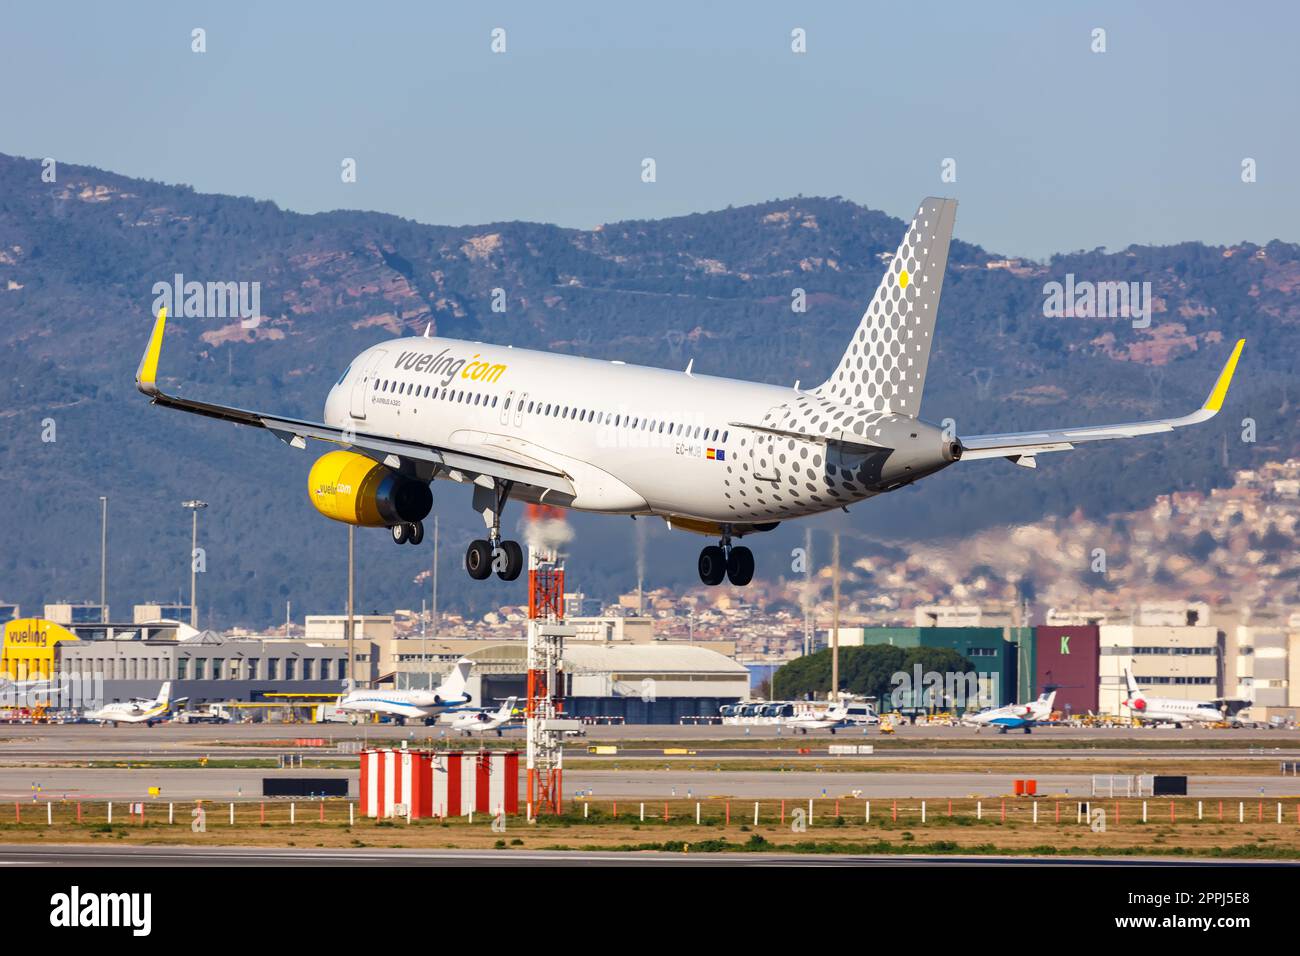 Vueling Airbus A320 airplane Barcelona airport in Spain Stock Photo